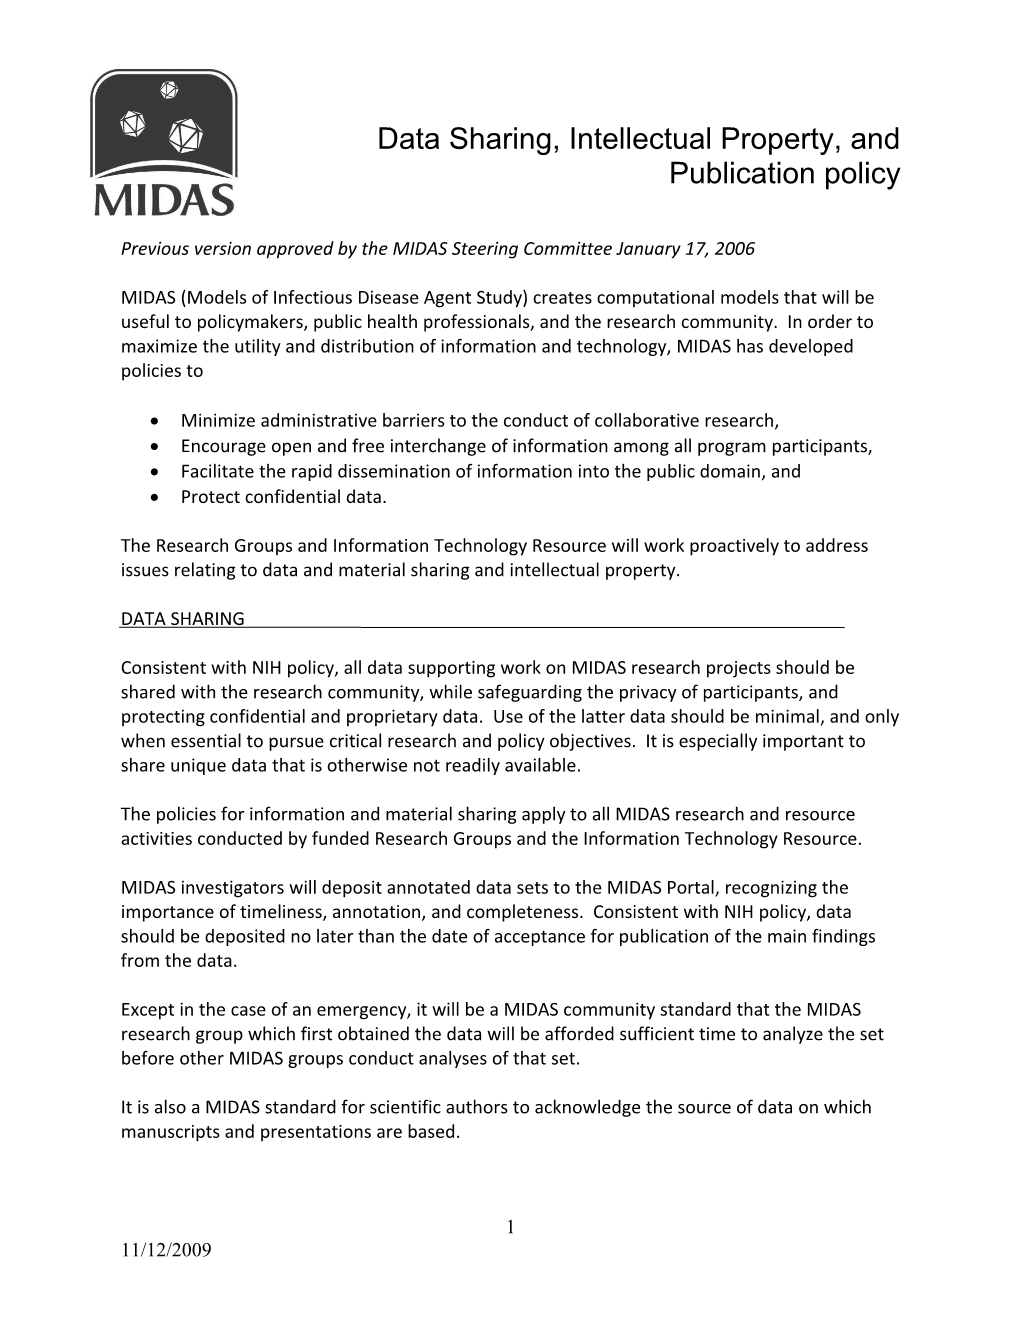 MIDAS (Models of Infectious Disease Agent Study) Is Committed to Open Communication And